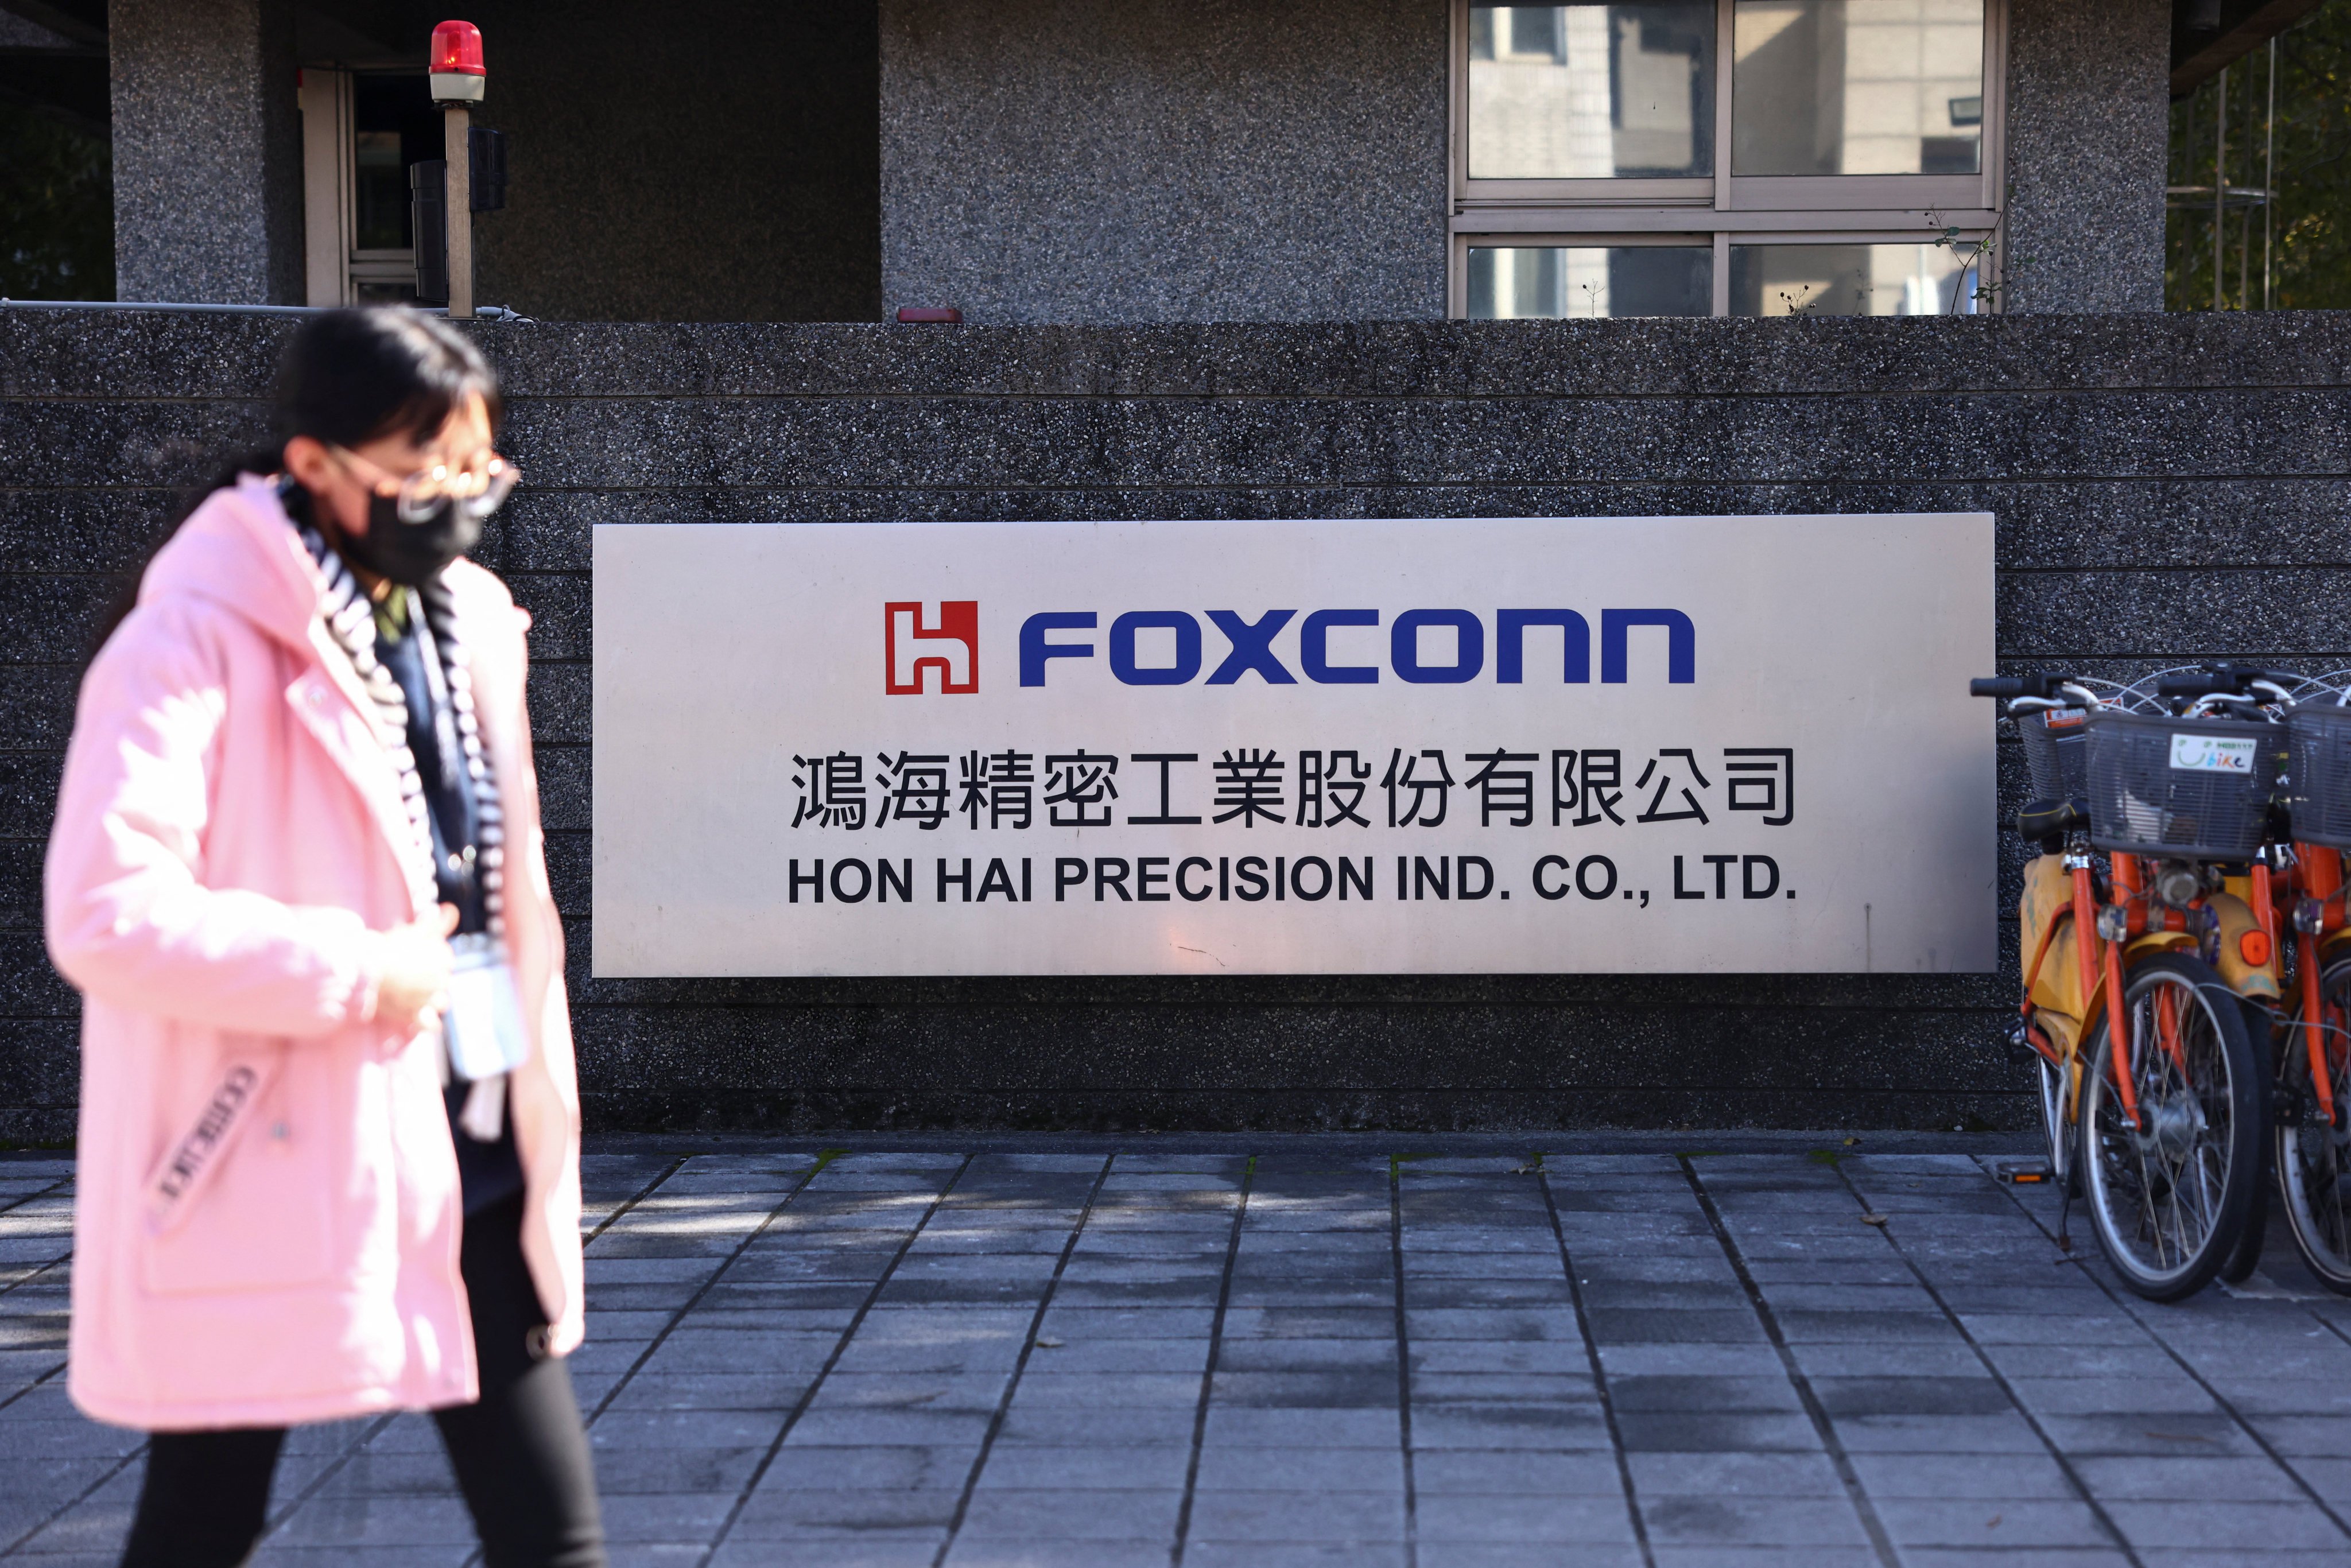 The Foxconn logo seen outside the company’s building in New TaipeI City, Taiwan, on December 22, 2022. Photo: Reuters